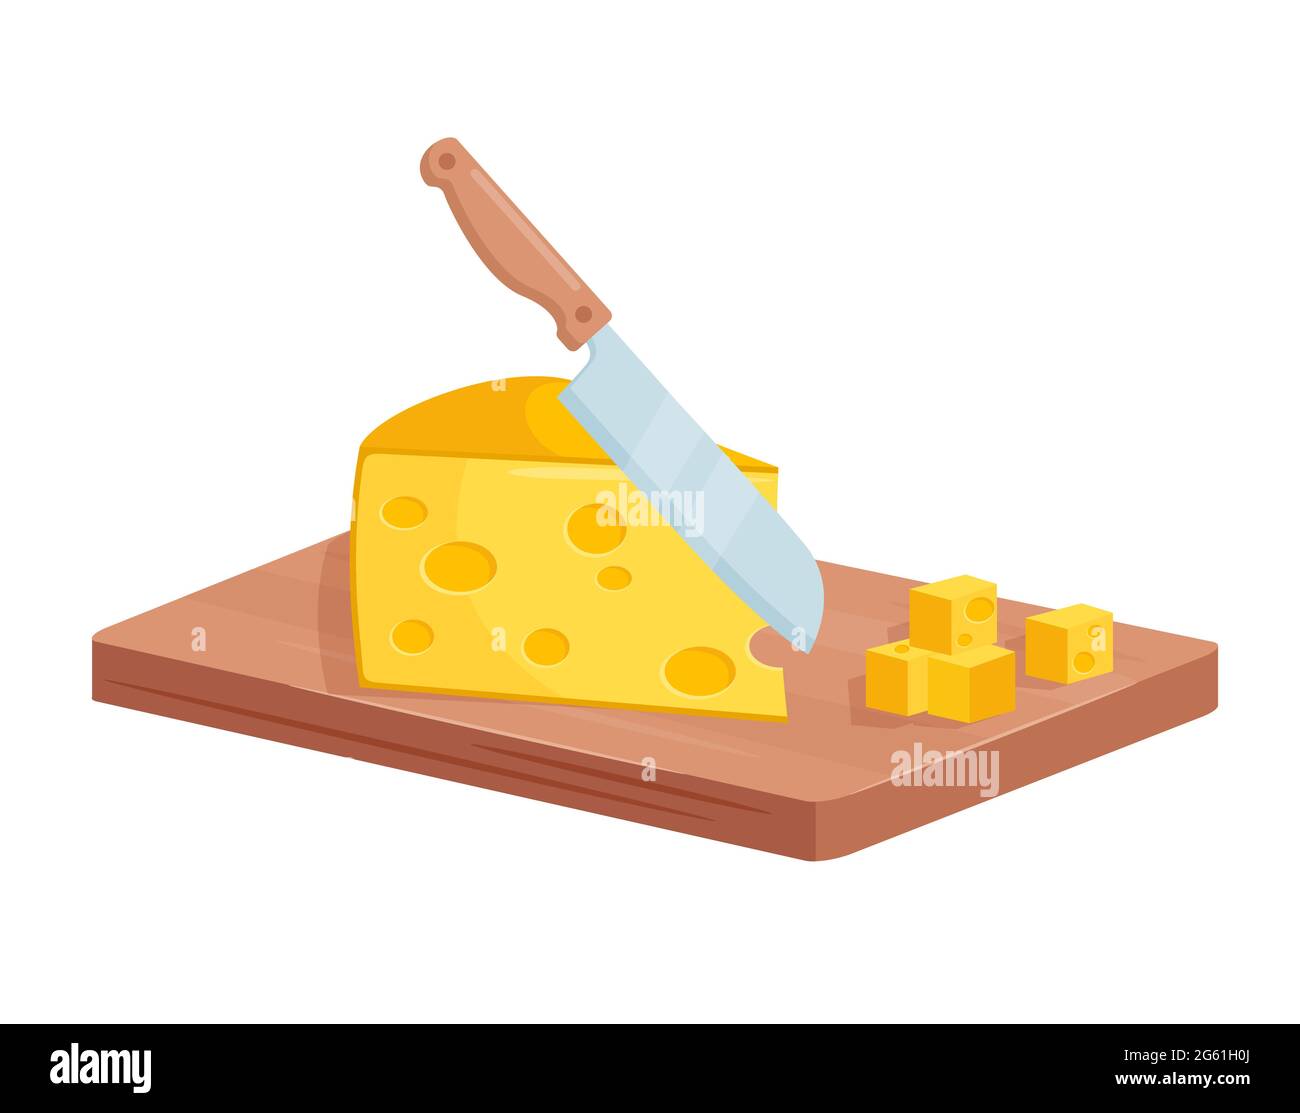 Dice cut cheese isometric diced cheese on wooden board while cooking food process Stock Vector